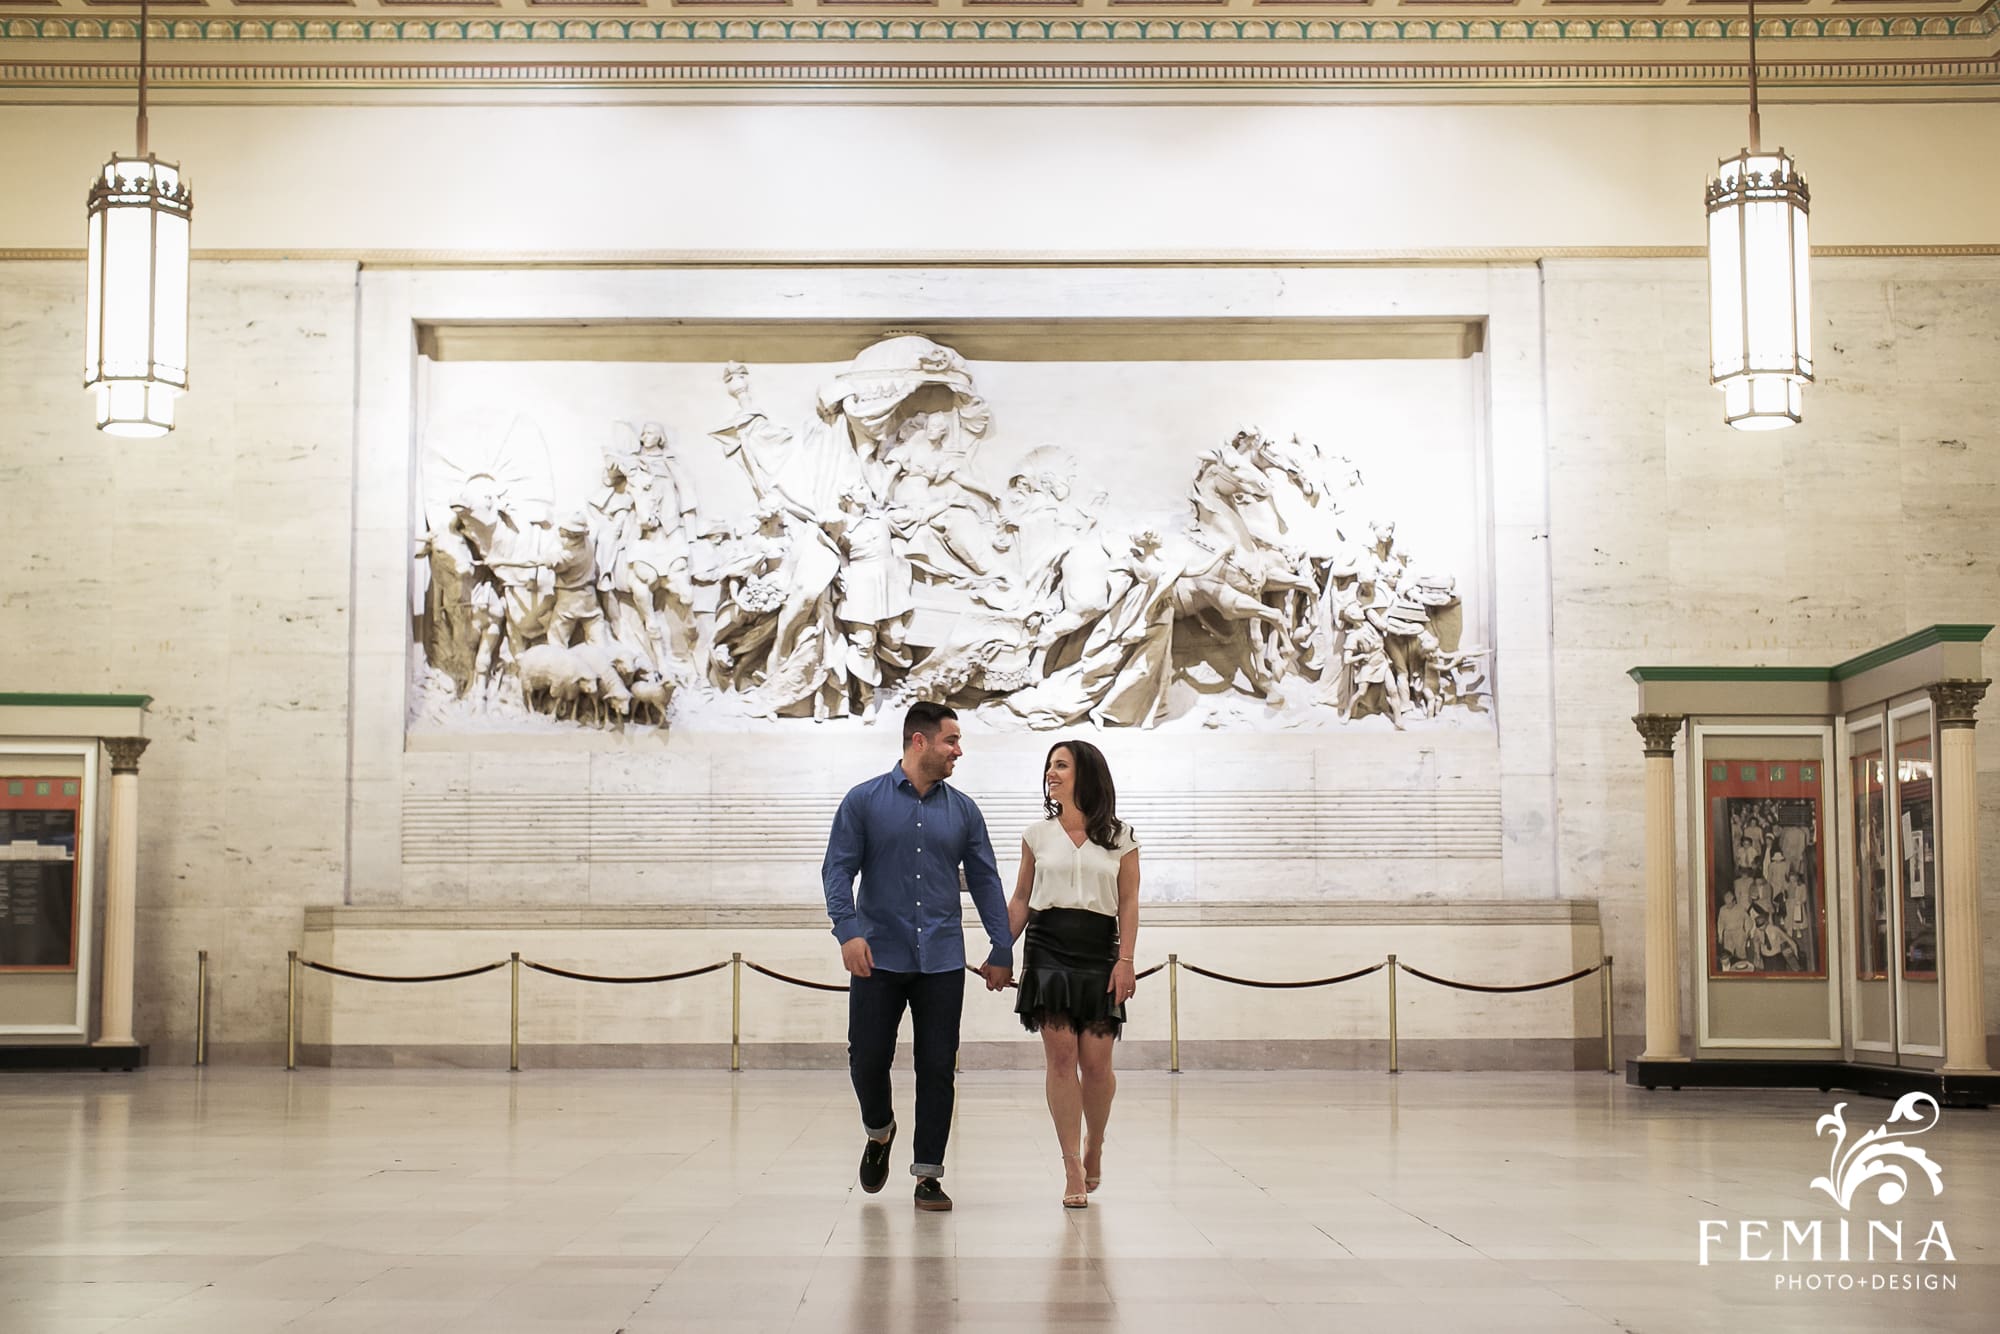 Julie and Justin walk through the 30th Street Station in Philadelphia